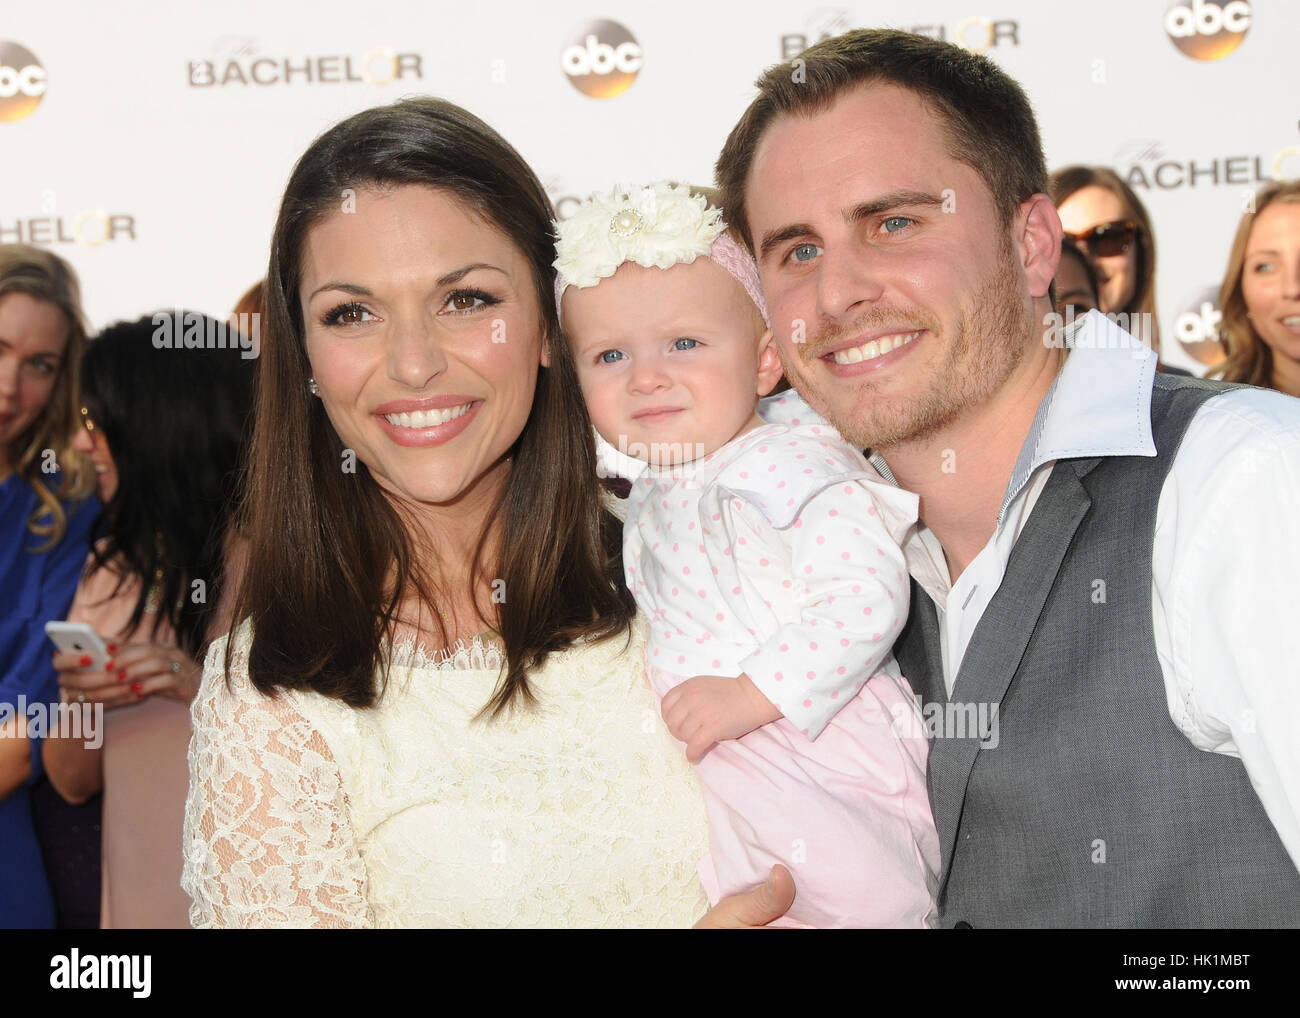 Hollywood, CA, USA. 5th Jan, 2015. 5 January 2015 - Hollywood, California - DeAnna Pappas Stagliano, Addison Stagliano, Stephen Stagliano. ABC's ''The Bachelor'' Season 19 Premiere held at Line 204 East Stages. Photo Credit: Byron Purvis/AdMedia Credit: Byron Purvis/AdMedia/ZUMA Wire/Alamy Live News Stock Photo